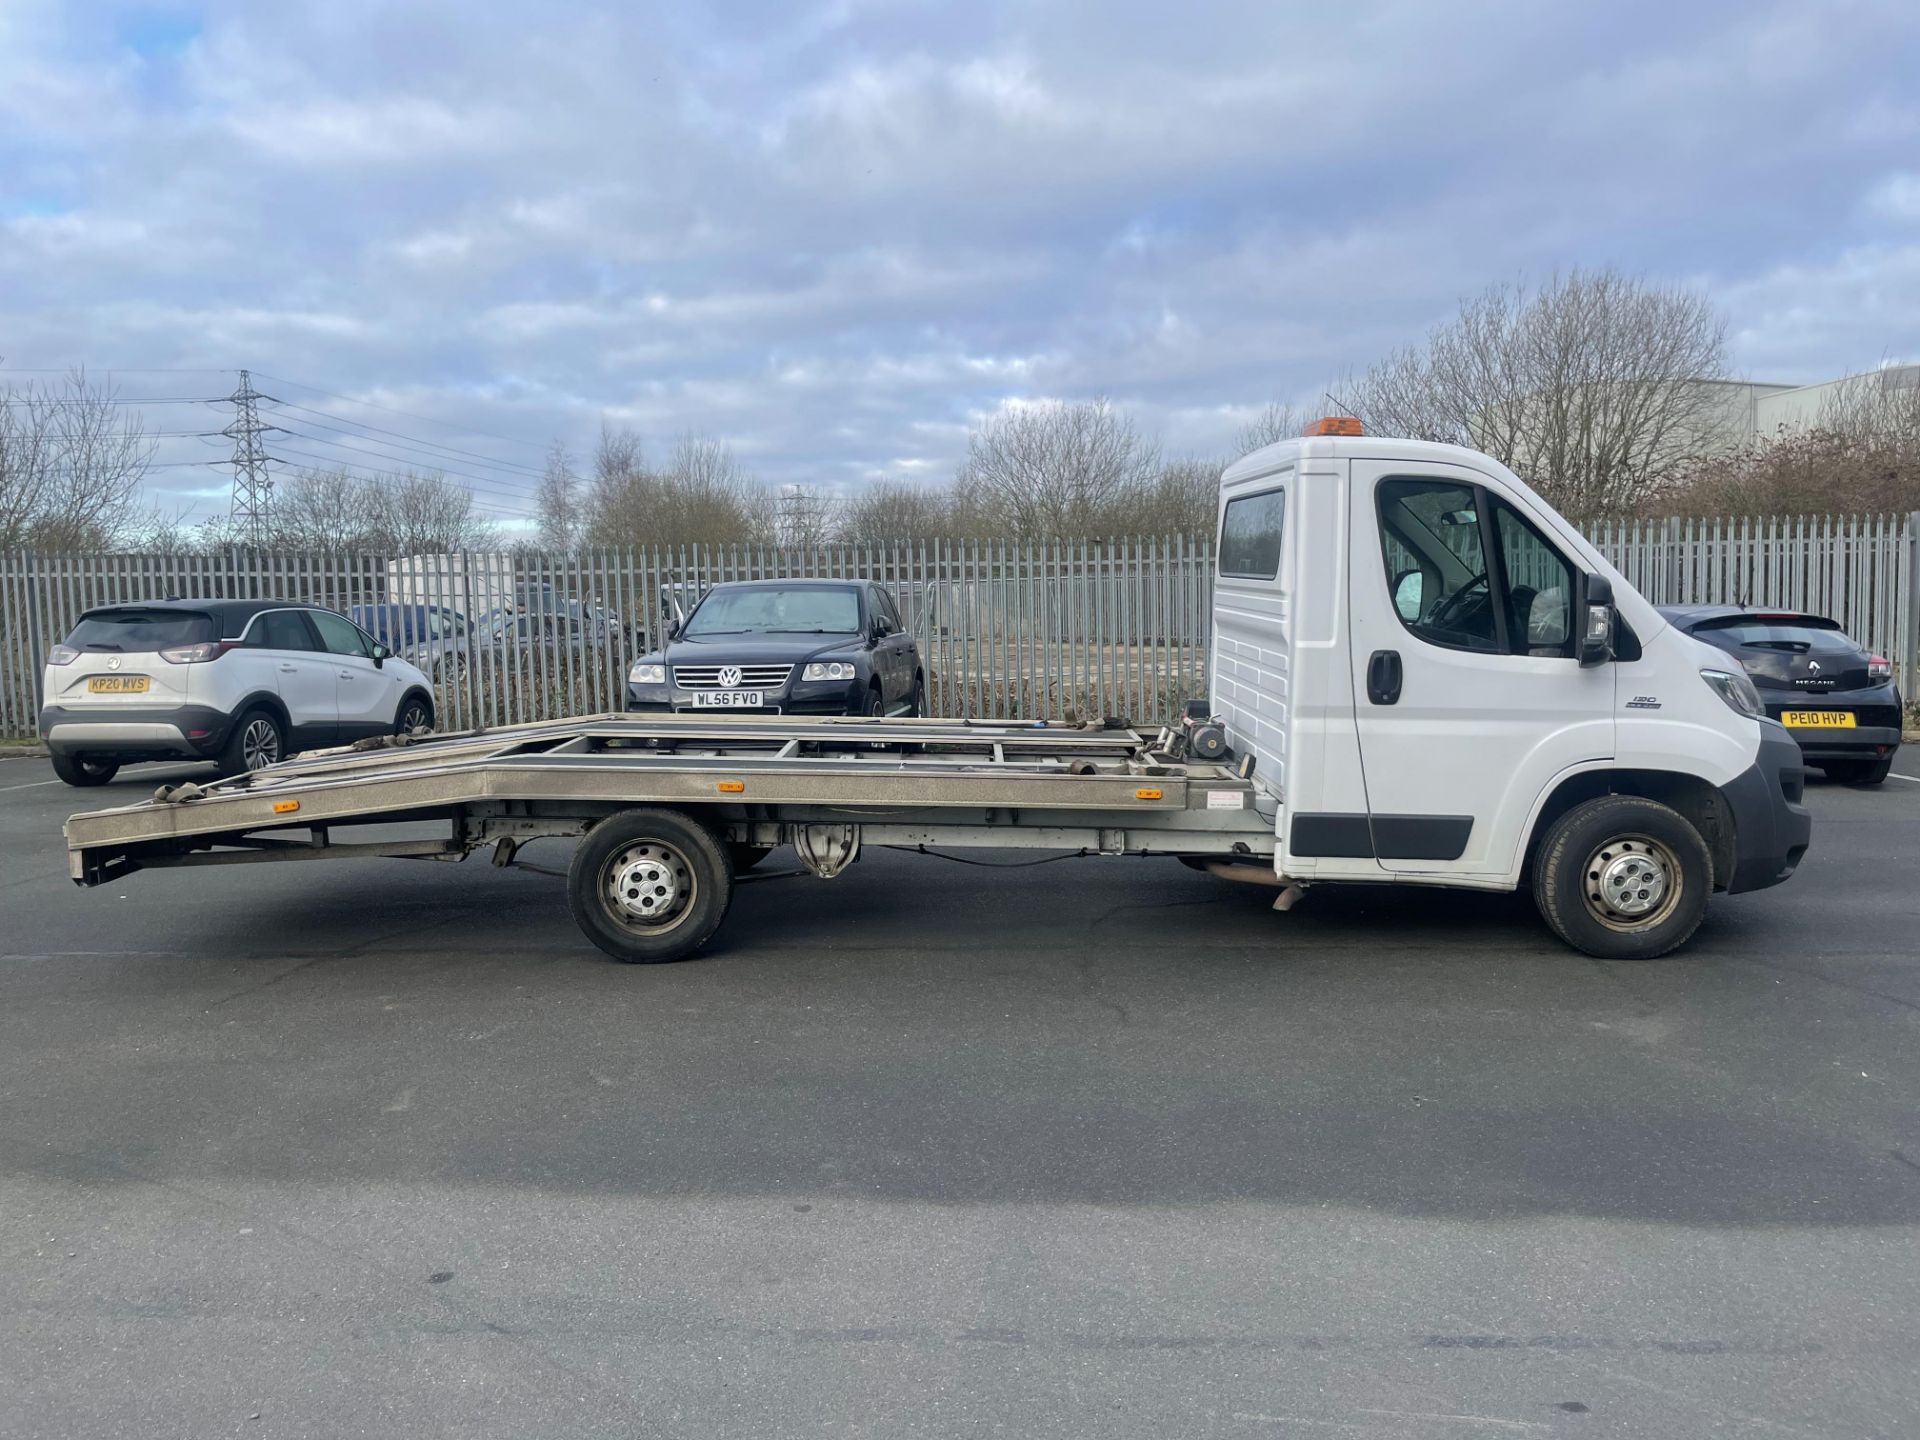 2015 Fiat Ducato Multijet 130 L3H1 3.5T Recovery World Beavertail Recovery Truck c/w Winch and Tow - Image 4 of 17